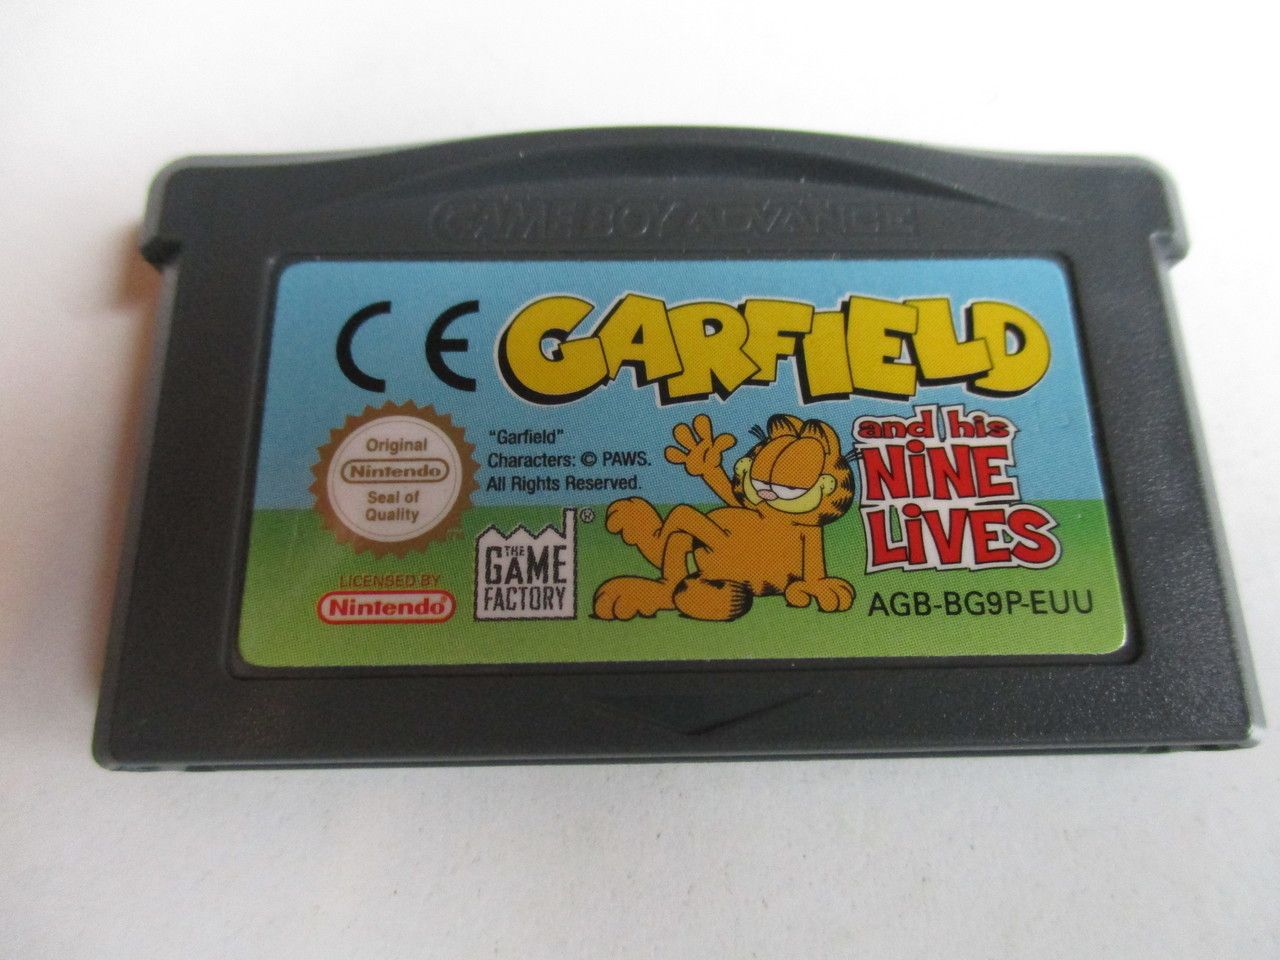 Ranking The 10 Best Garfield Games Ever Made